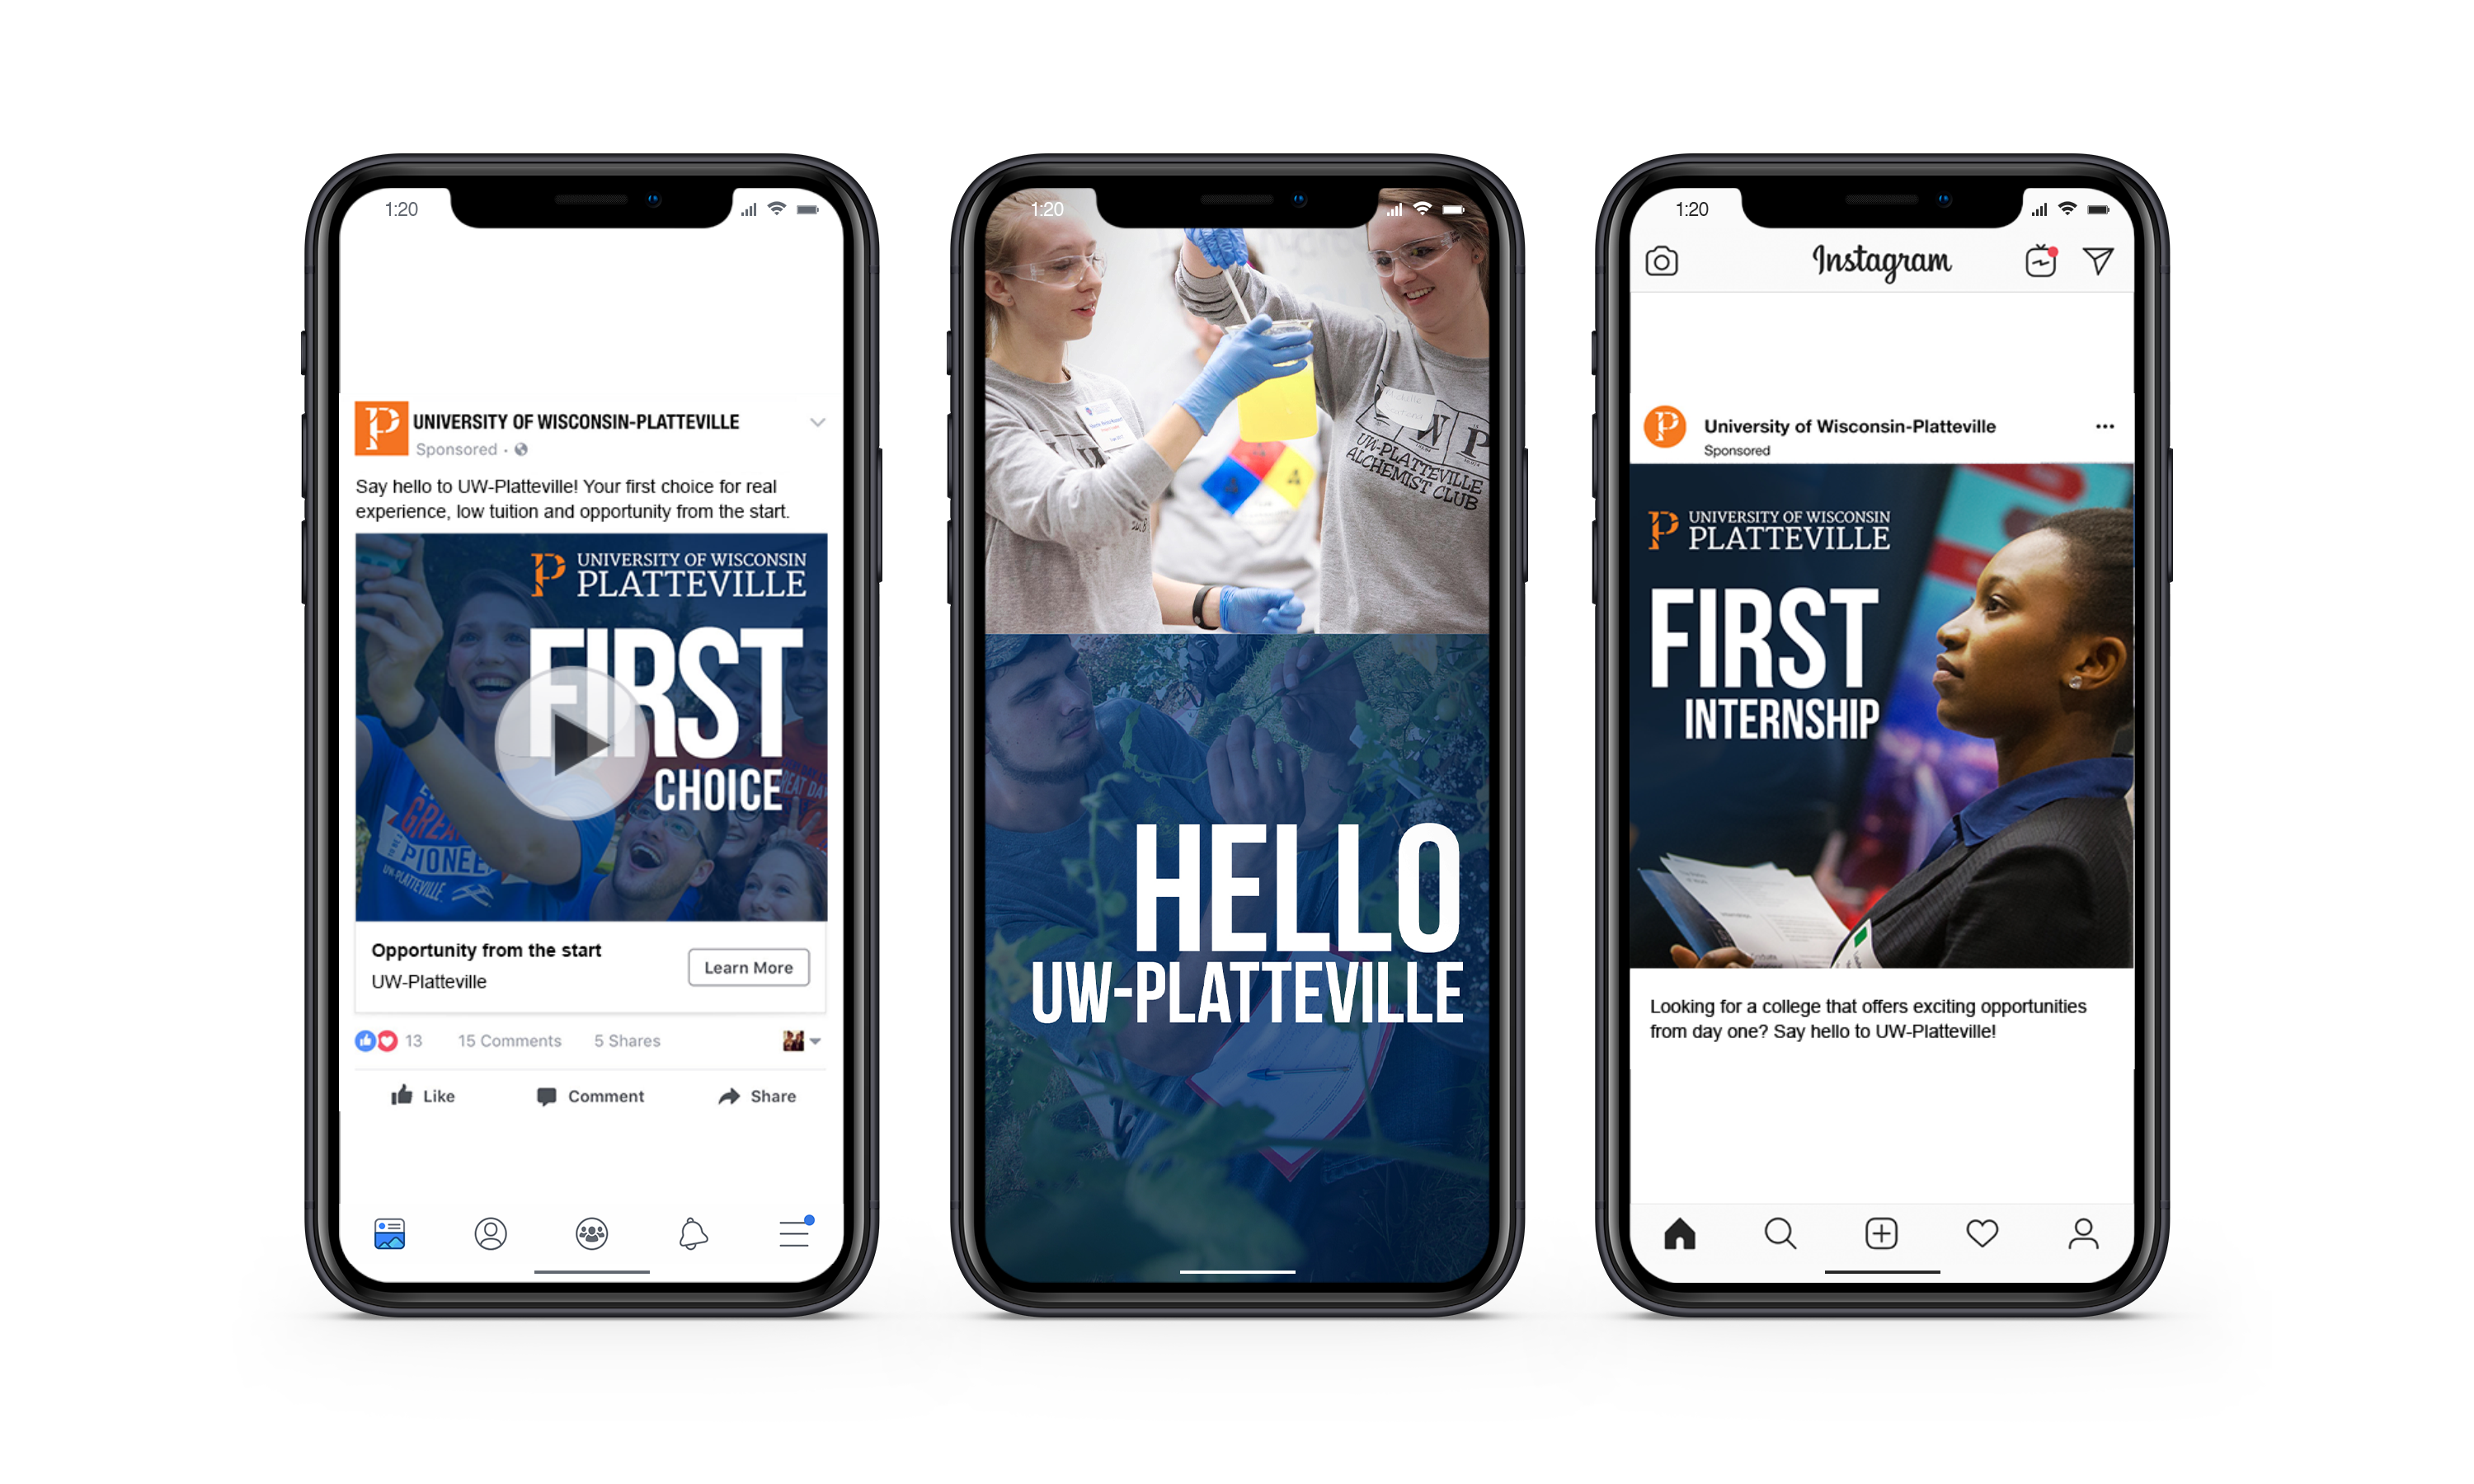 Three UW-Platteville social media ads displayed on mobile phone screens, inviting viewers to learn more